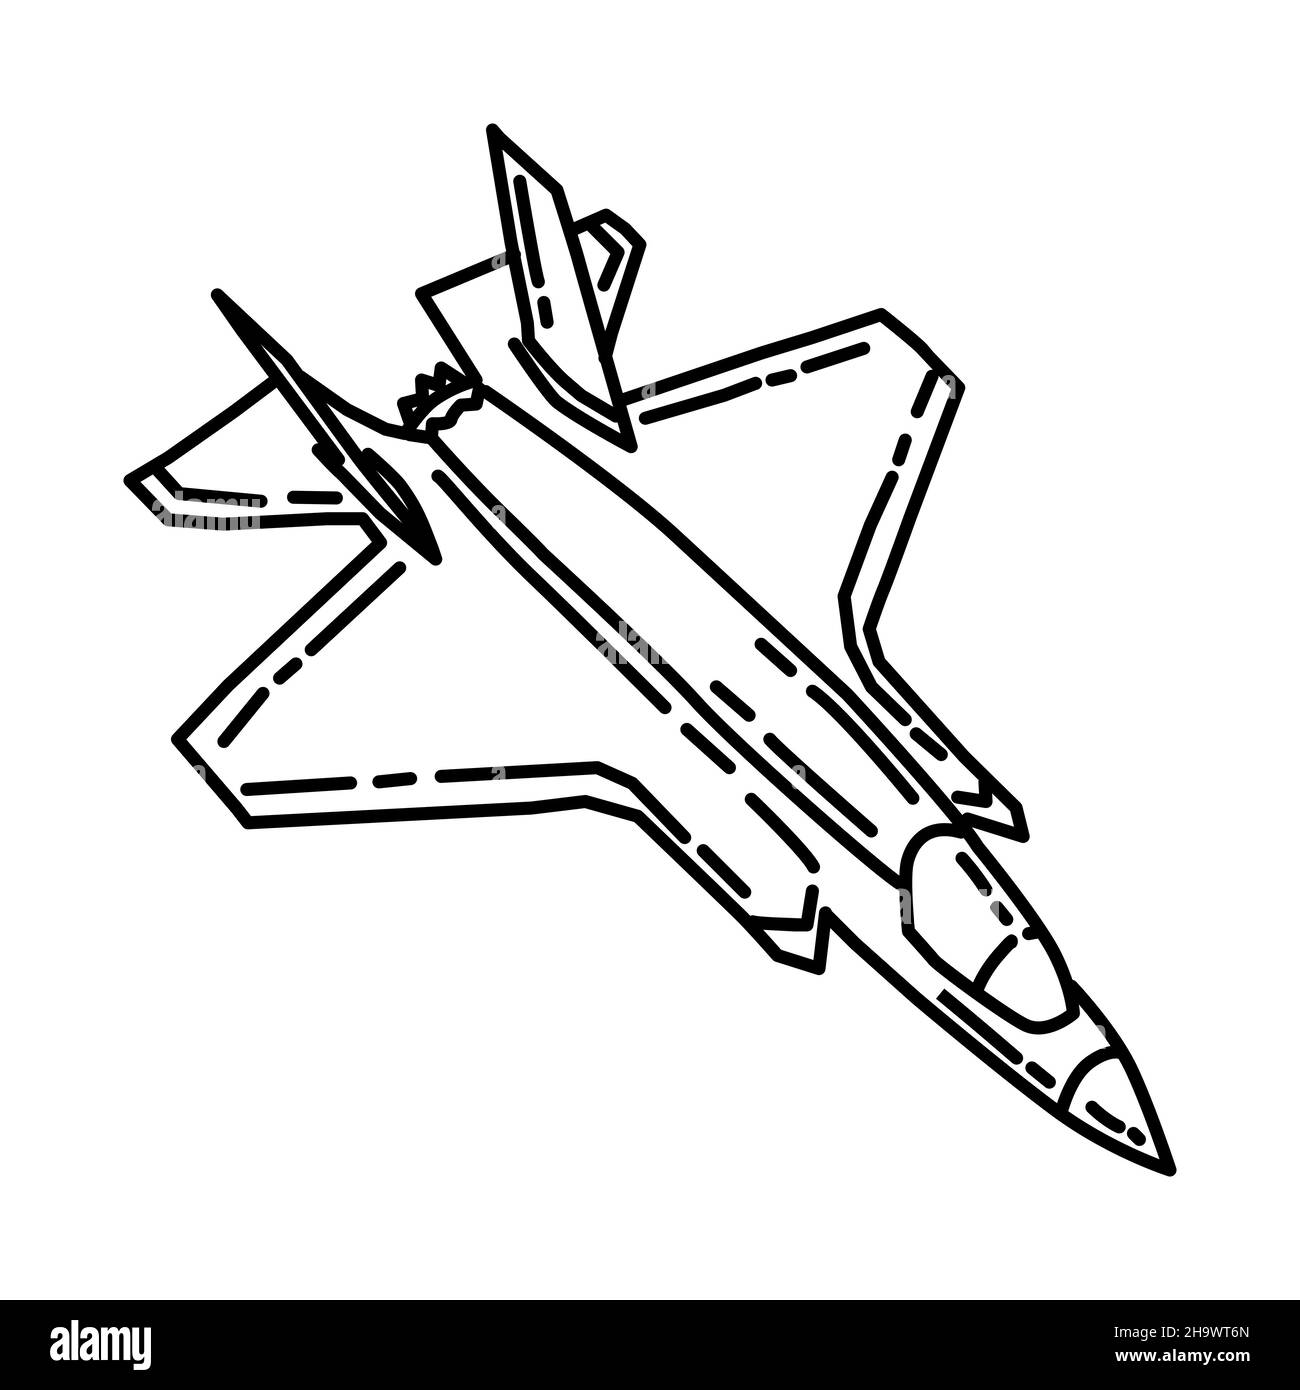 Marine Jet Fighter Part of Military and Marine Corps Equipments Hand Drawn Icon Set Vector Stock Vector